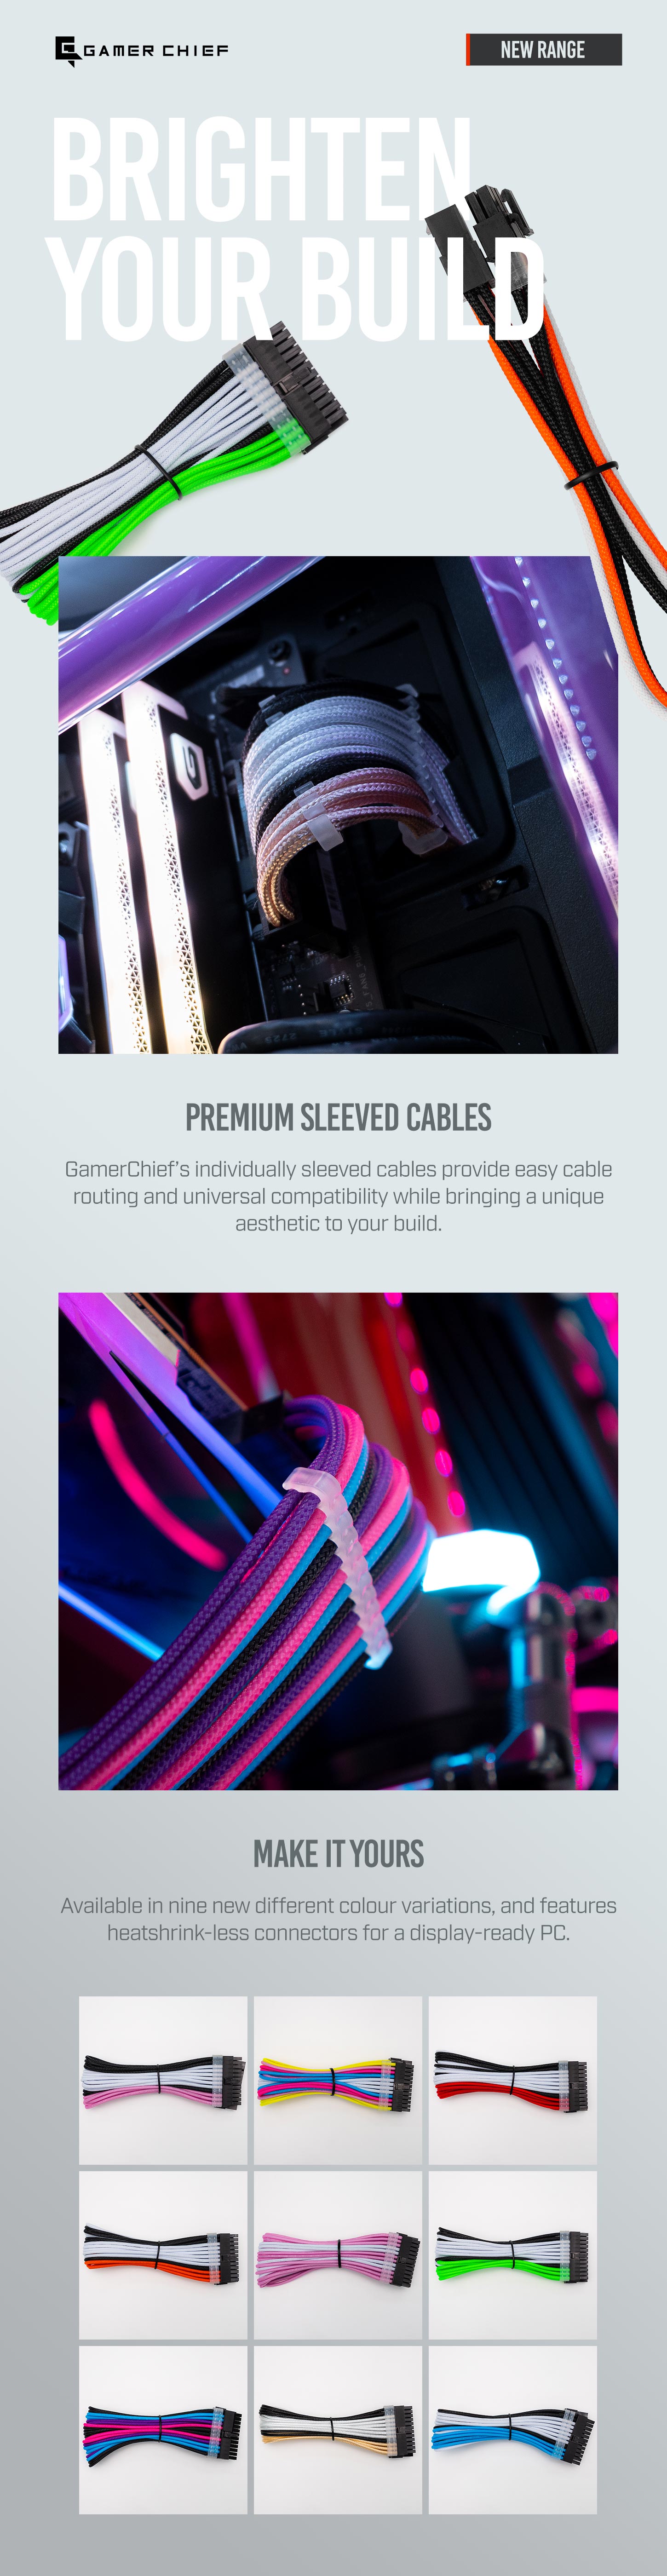 A large marketing image providing additional information about the product GamerChief Elite Series 6-Pin PCIe 30cm Sleeved Extension Cable (Gold/White/Black) - Additional alt info not provided